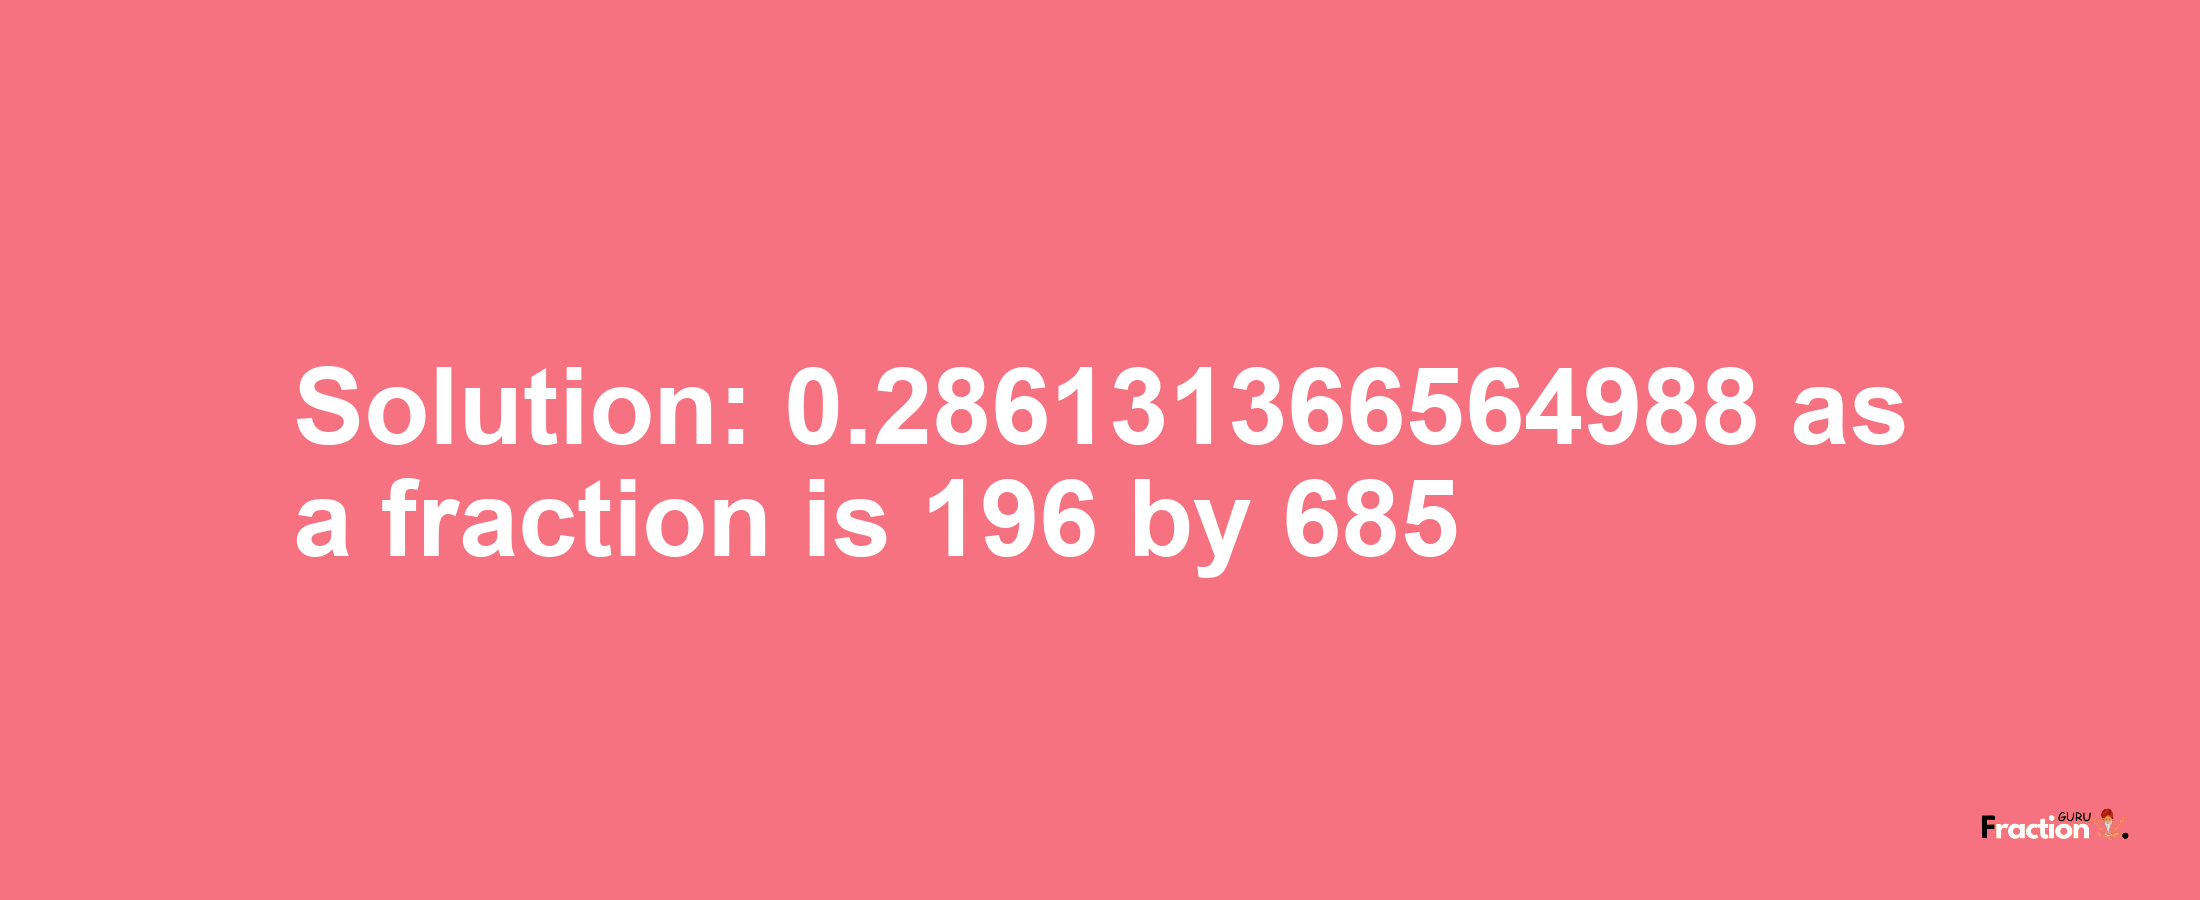 Solution:0.286131366564988 as a fraction is 196/685